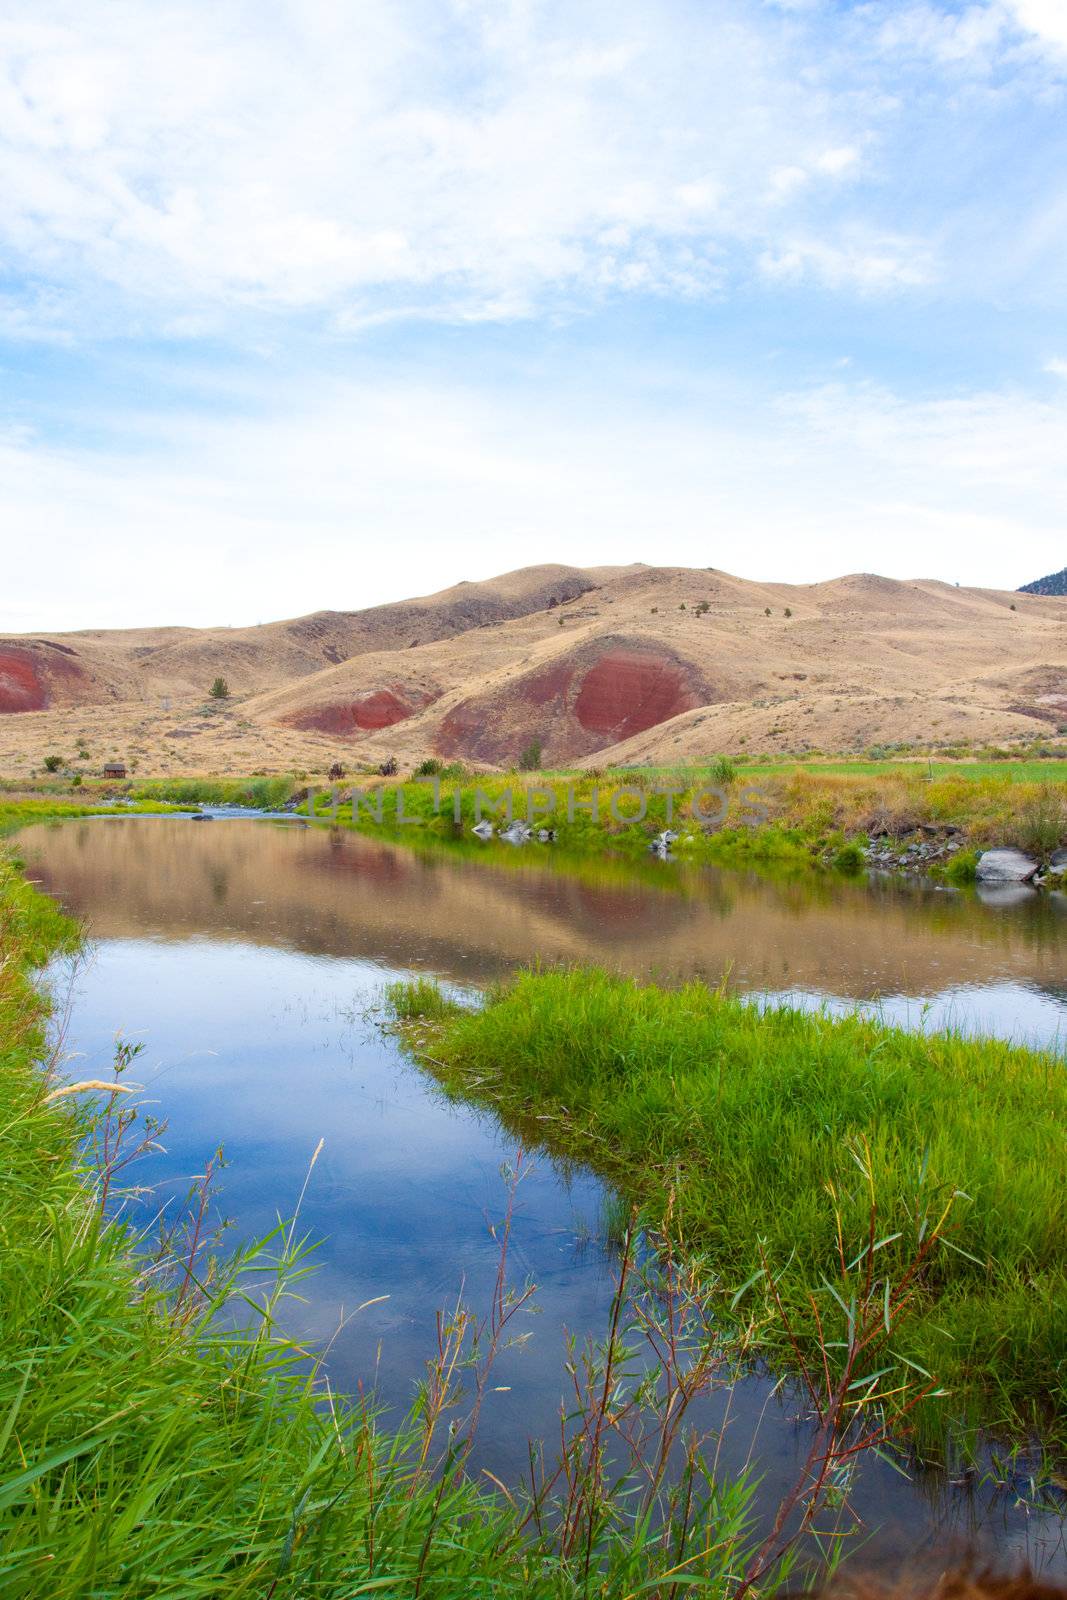 The John Day River flows slowly through the Painted Hills National Monument.